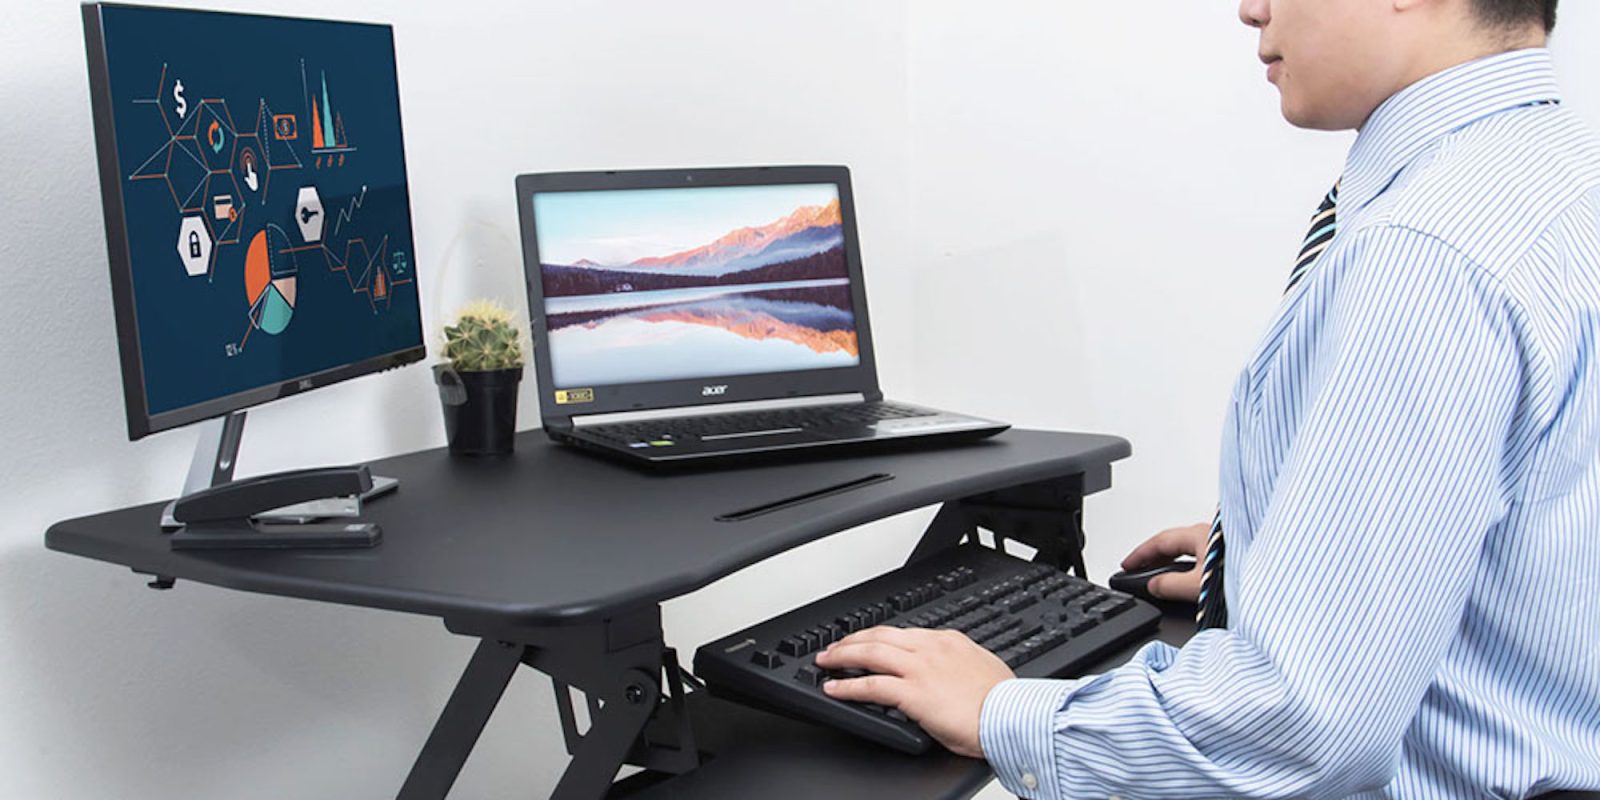 Elevate Your Workflow With This Adjustable Height Desk Adapter